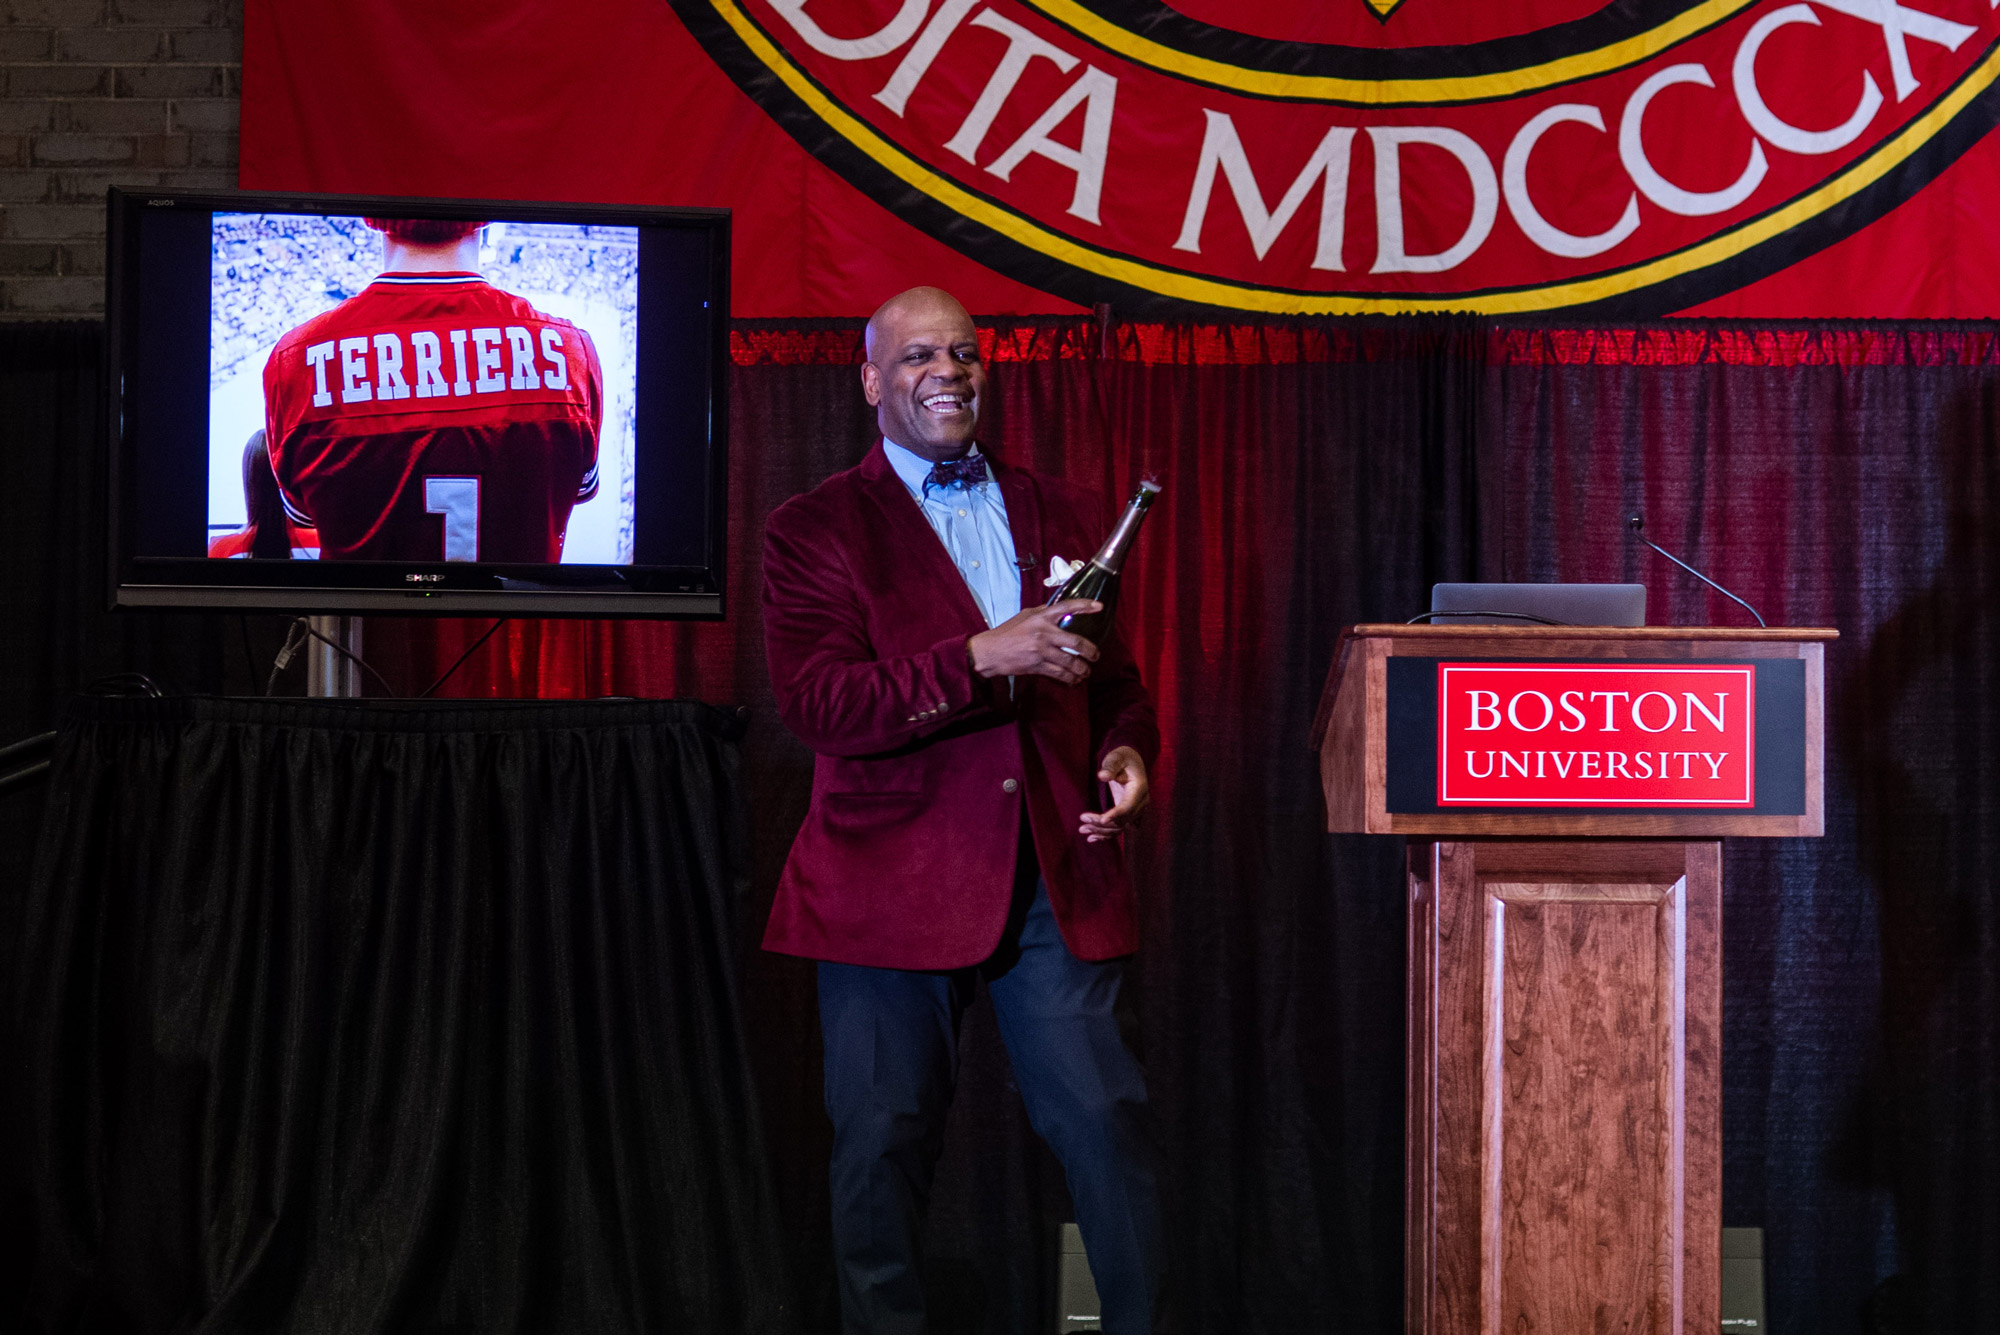 Dean Kenneth Elmore stands on a stage in the George Sherman Union next to a podium with a red Boston University sign on it. He wears a red blazer and holds a champagne bottle. Behind him, a screen shows an image of the back of a Terriers jersey.